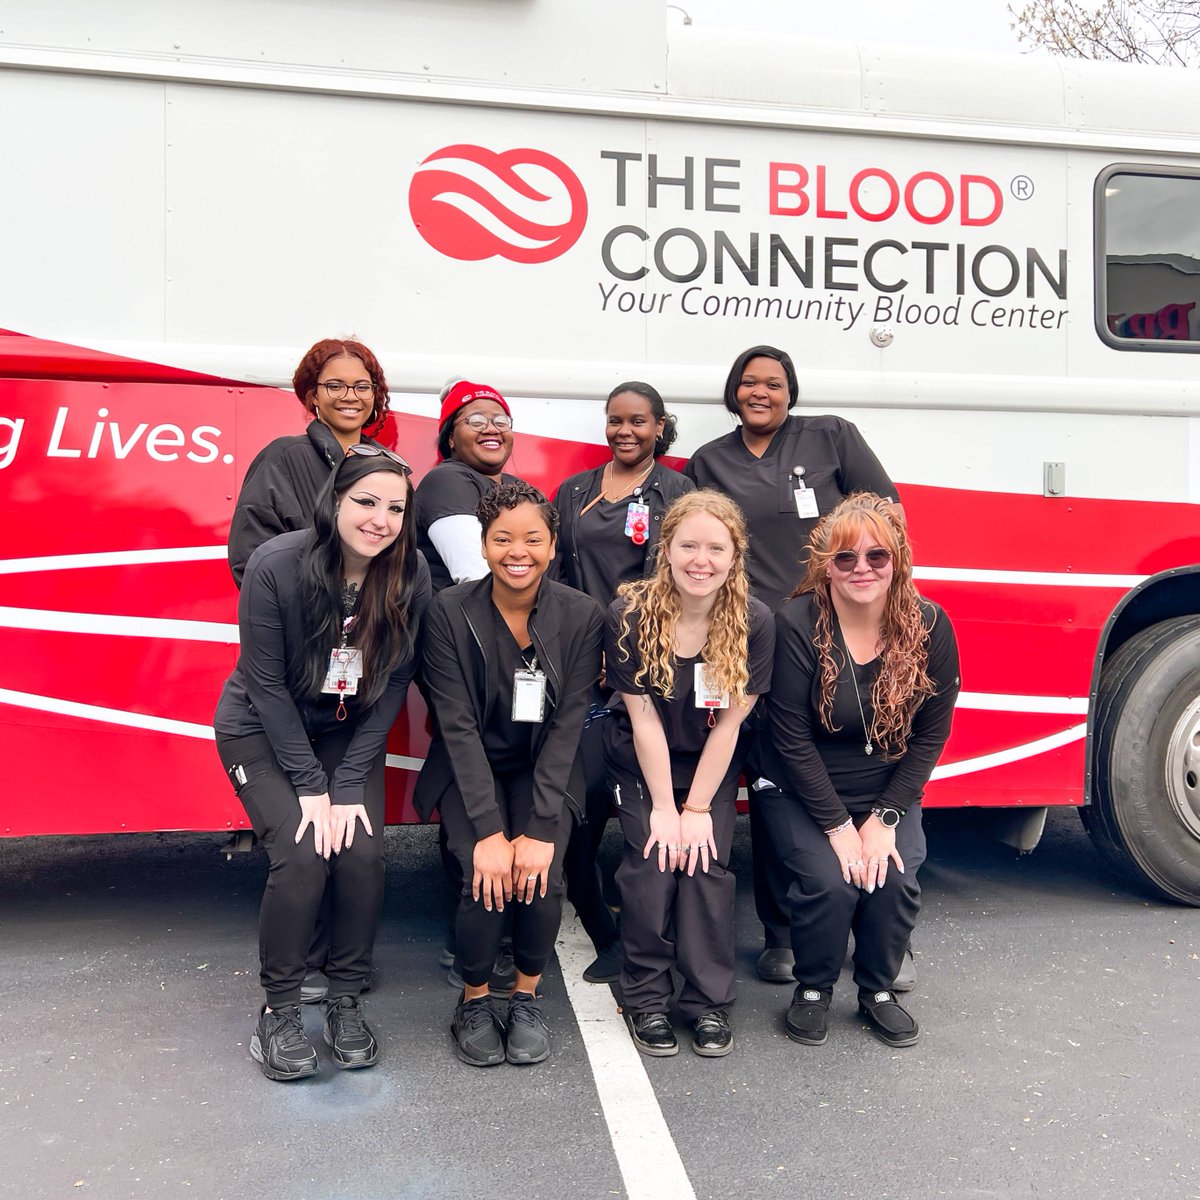 Introducing our #RoanokeVA team! They are eagerly awaiting your donations at our Valley View location. Swing by TUES – SAT, between 10 AM – 6 PM, and help save lives through #WholeBlood donations! 😊 📍4873 Valley View Blvd NW, Roanoke, VA 24012 👉 bit.ly/3UbyYIc